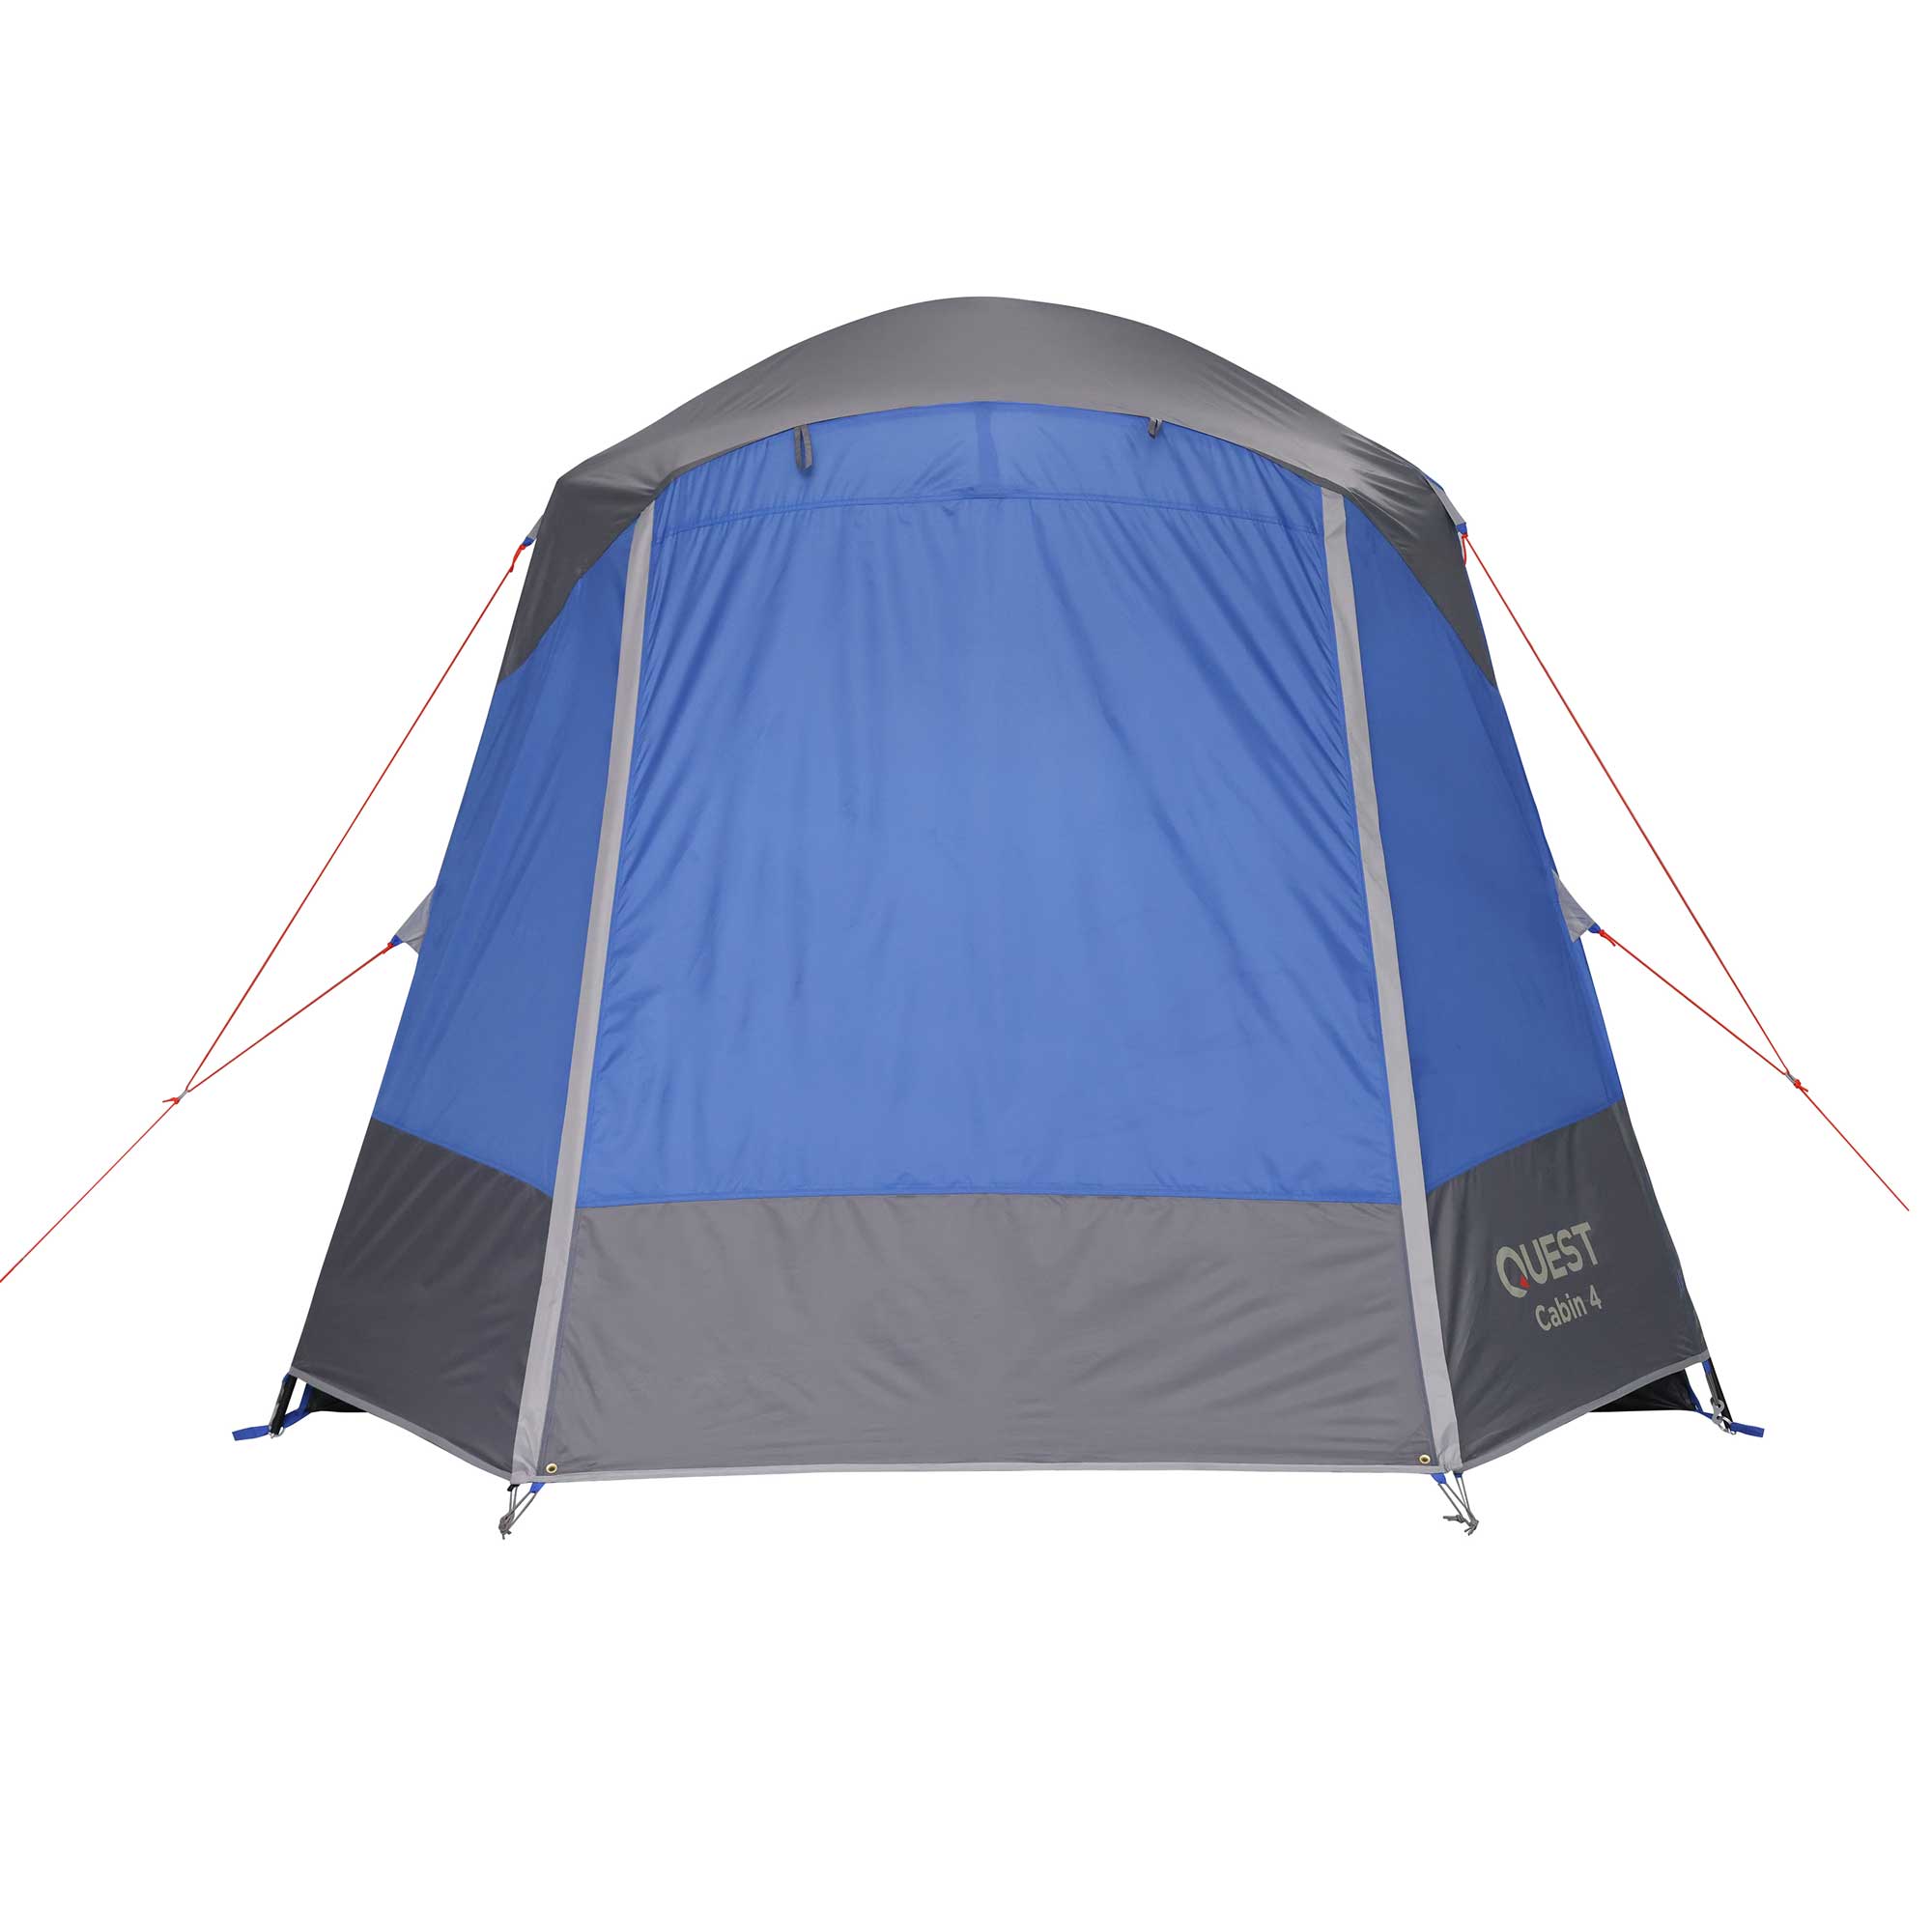 Quest Straight Wall Cabin Tent - 4 Person